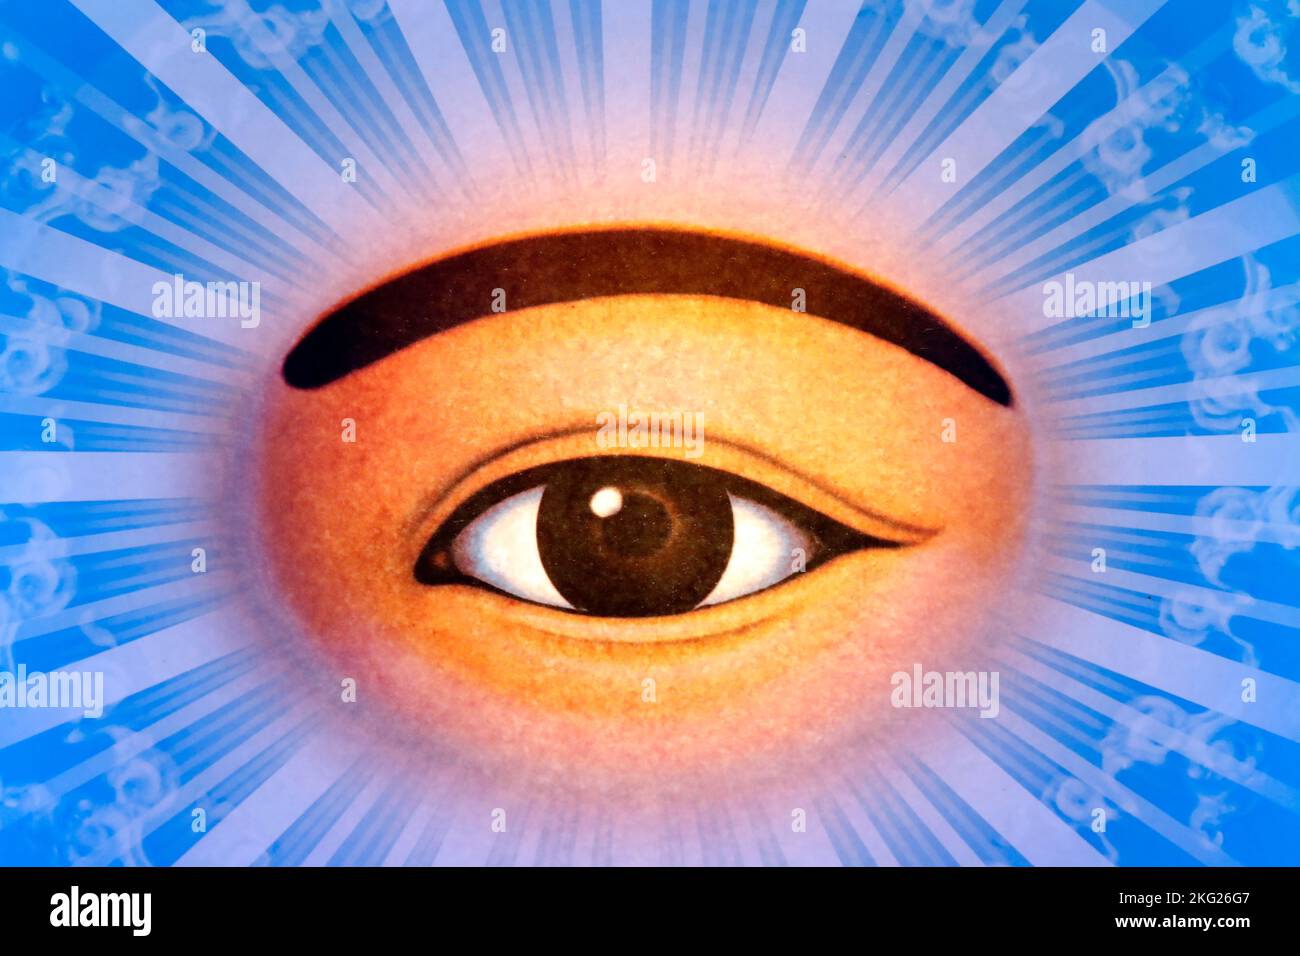 Cao Dai's left eye, similar to Eye of Providence.  Caodaism is a monotheistic syncretic new religious movement.  Tan Chau. Vietnam. Stock Photo